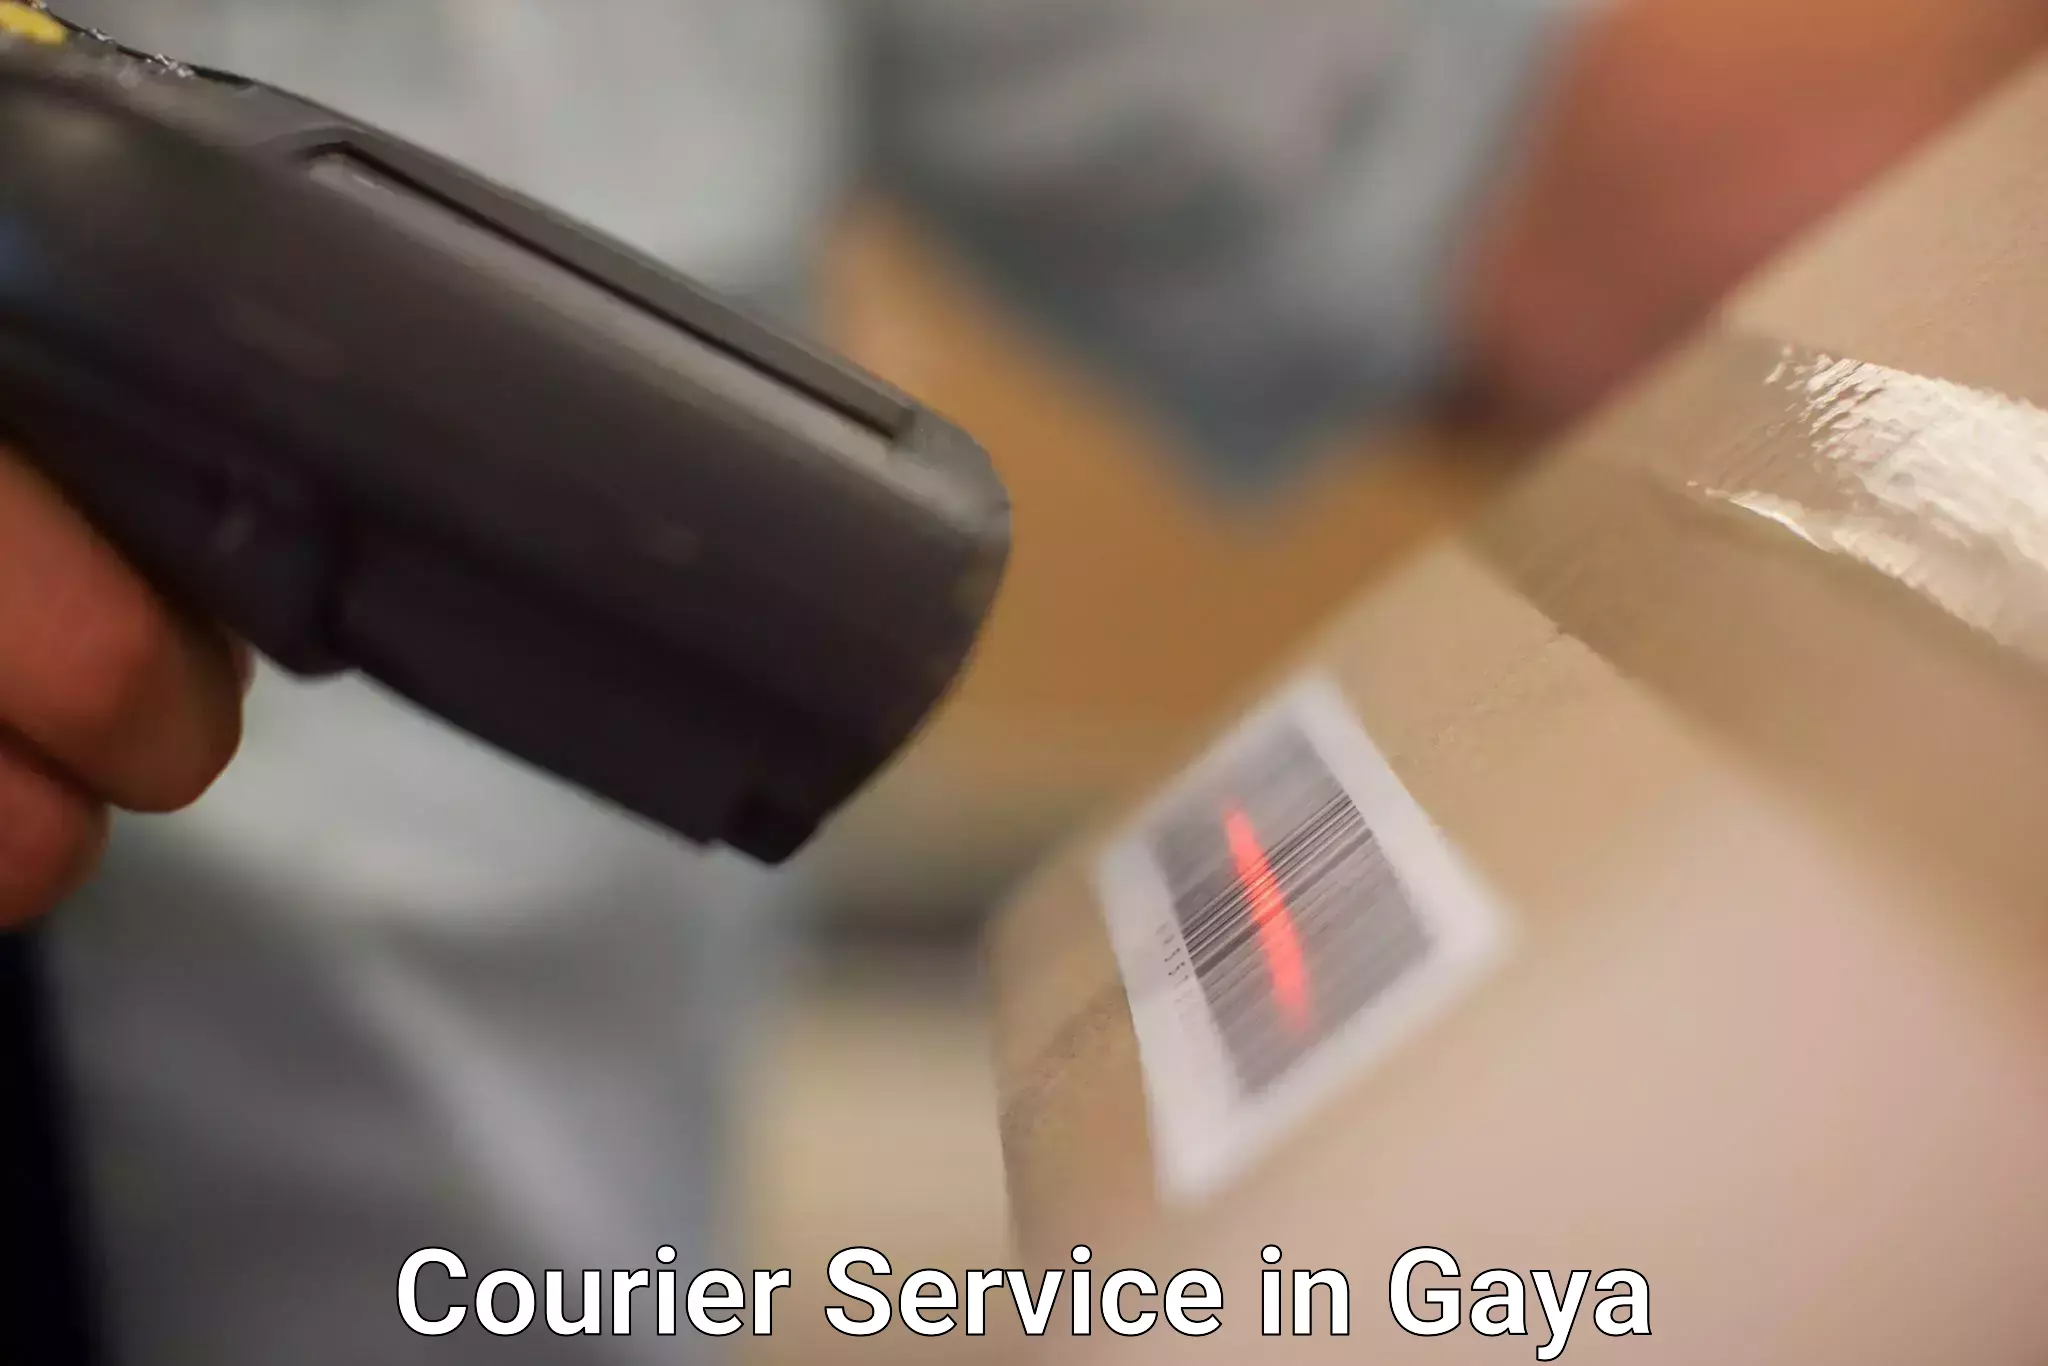 Postal and courier services in Gaya